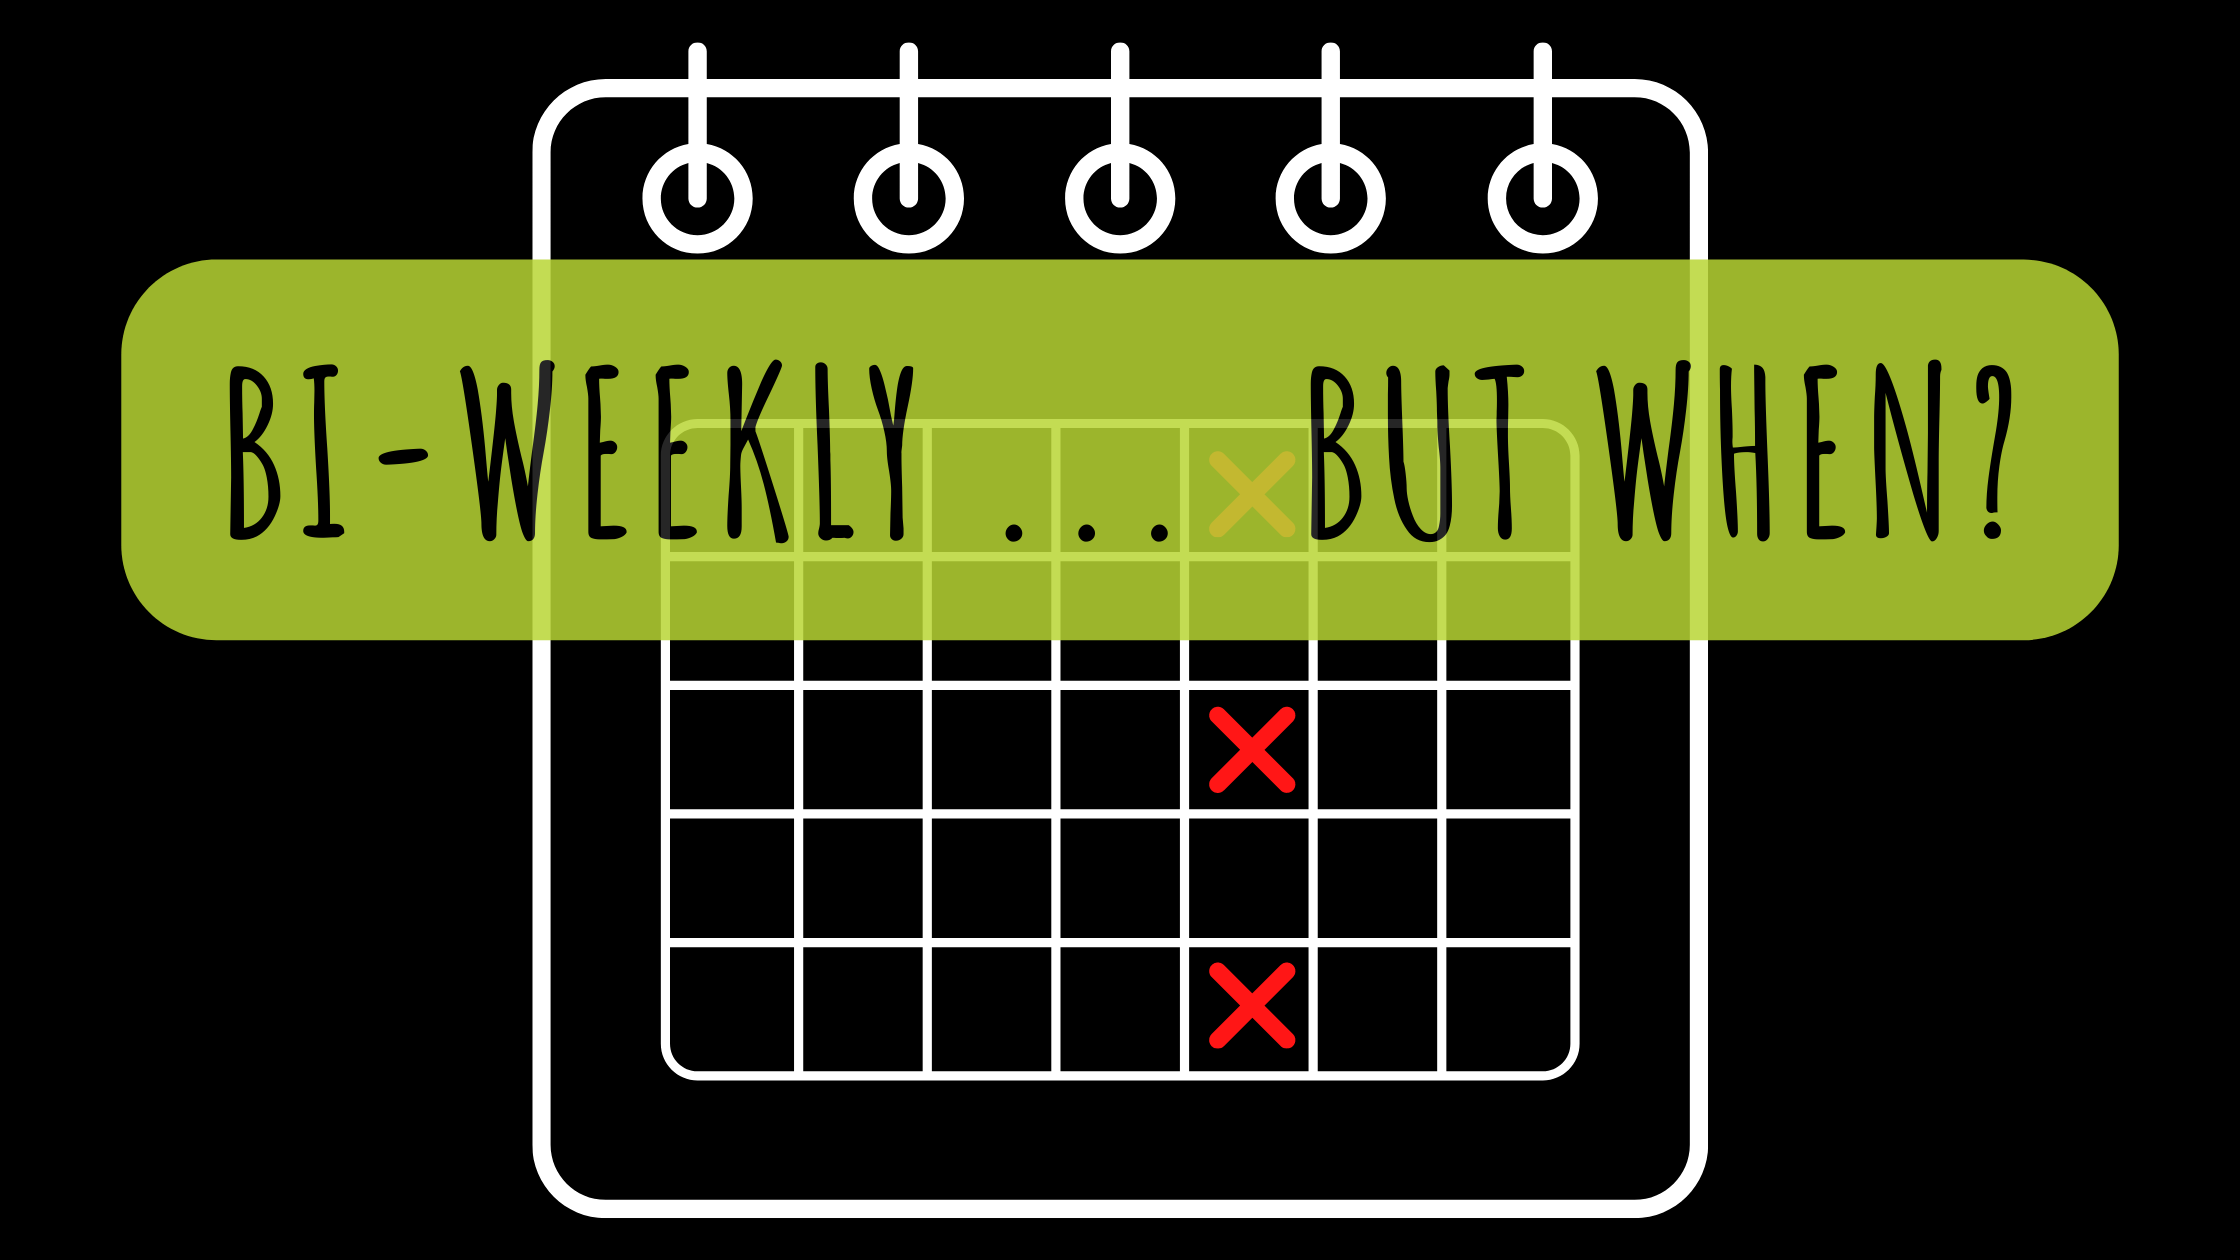 black background with white calendar image and red x's on every other week. Title that reads "Bi-Weekly... But When?" in black font on a green background